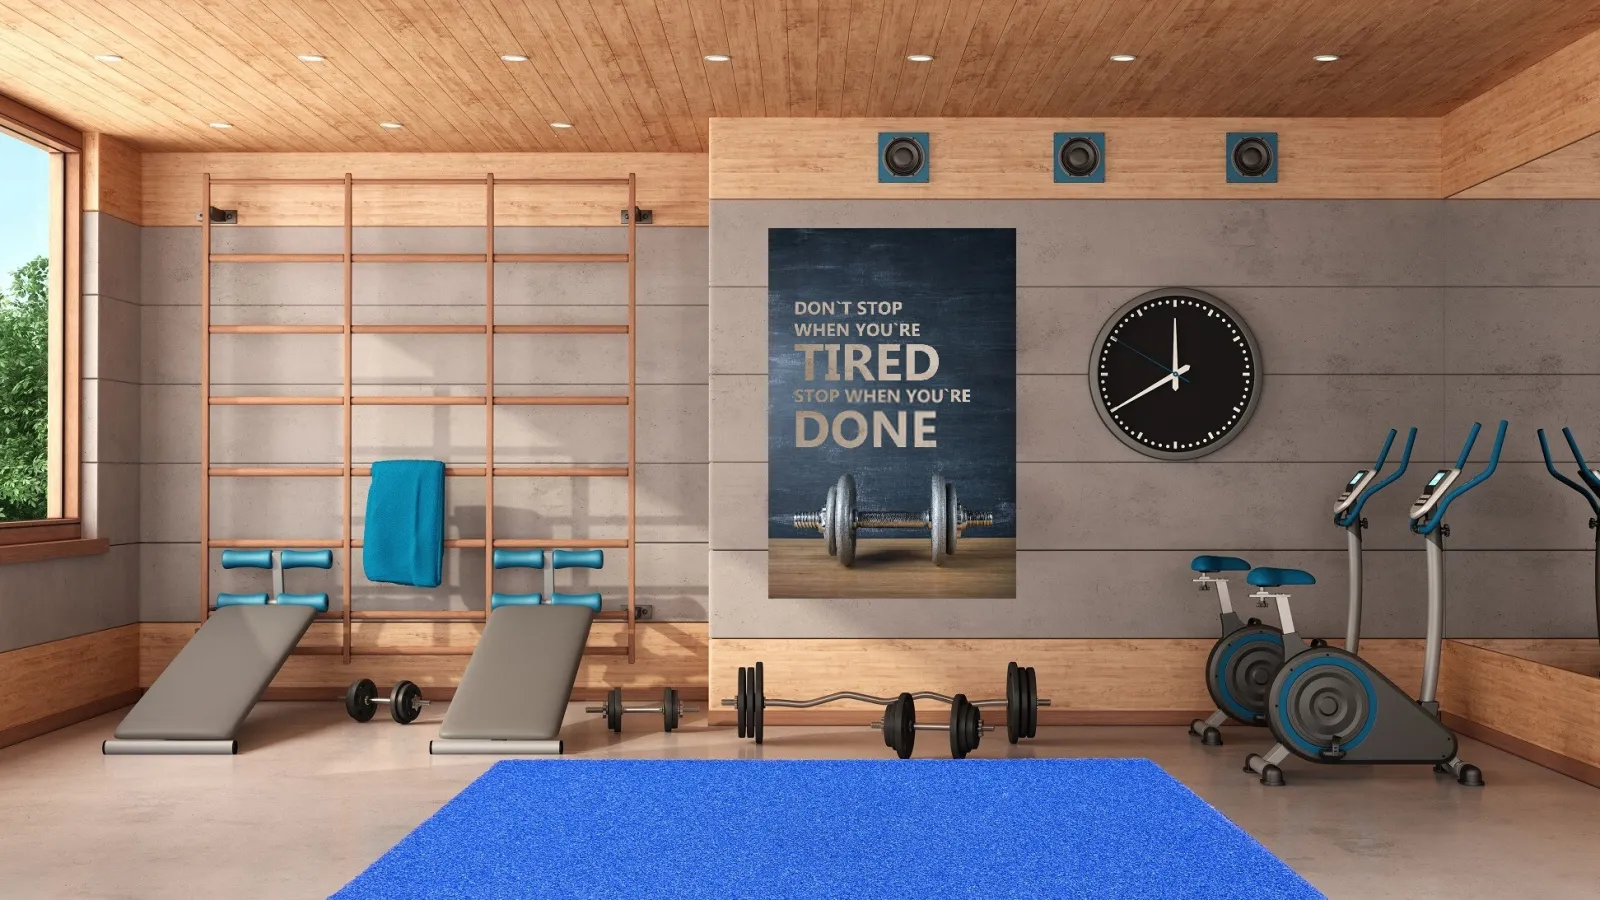 A gym with an inspirational Poster on the wall